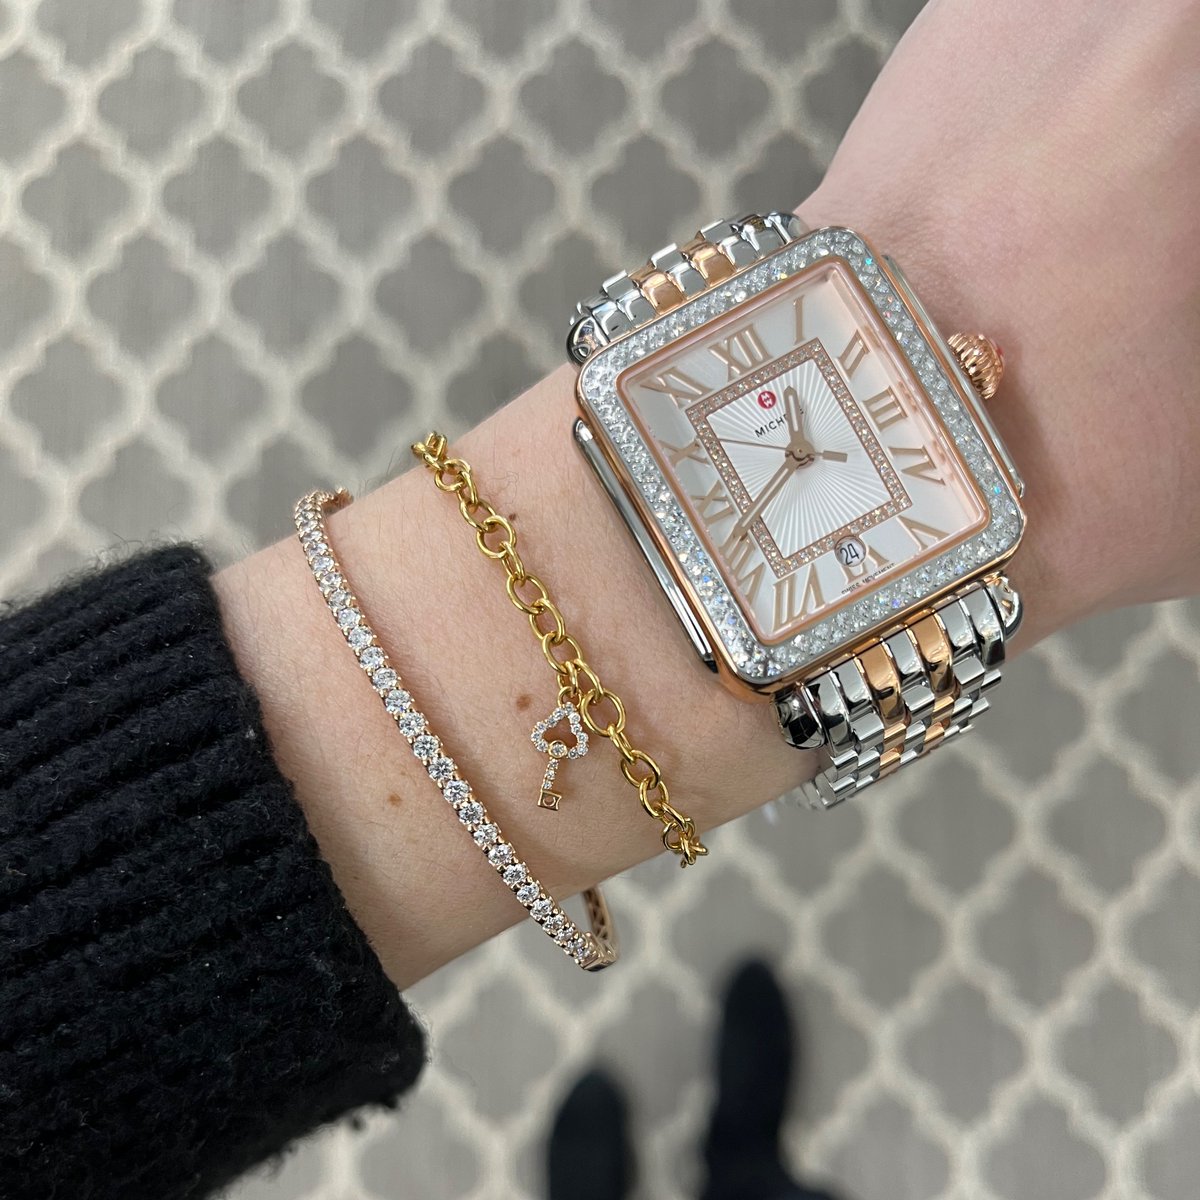 What do you think? Vote for your favorite look:
one: pink Rolex
two: pink face Michele Watch
Three: two tone rose Michele

#fashionstyle #WATCH #giftideas  #timepiece #ladieswatch #diamonds #valentinesdaygift #pinktones #armcandy #love #diamondbracelet